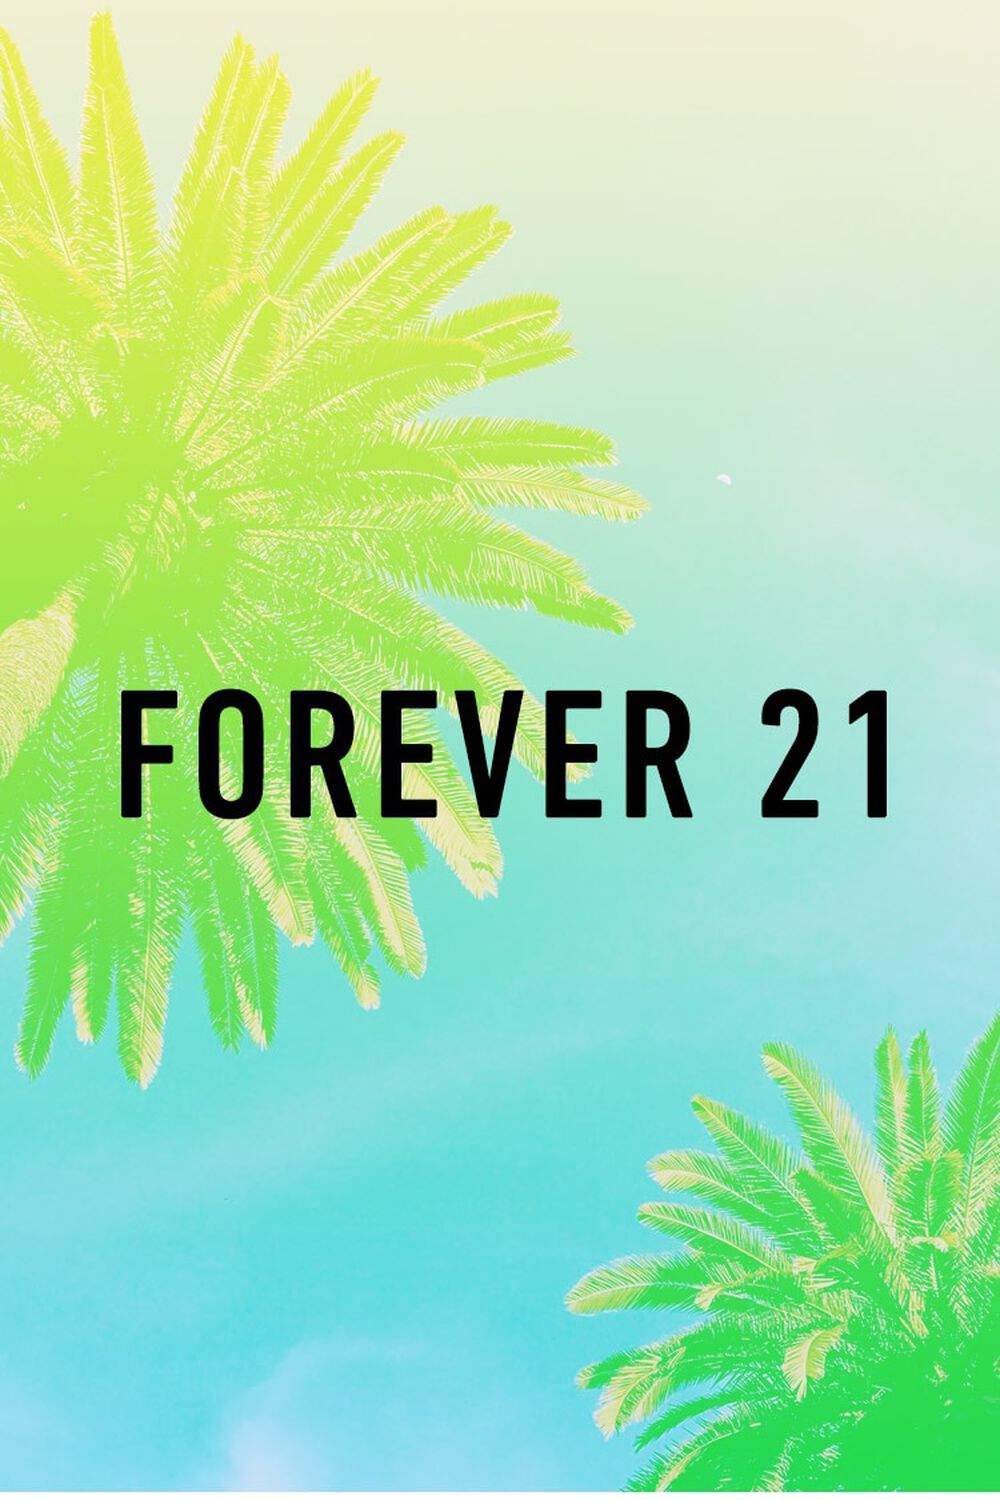 PALM TREE  Forever 21 E-Gift Certificate, image 1